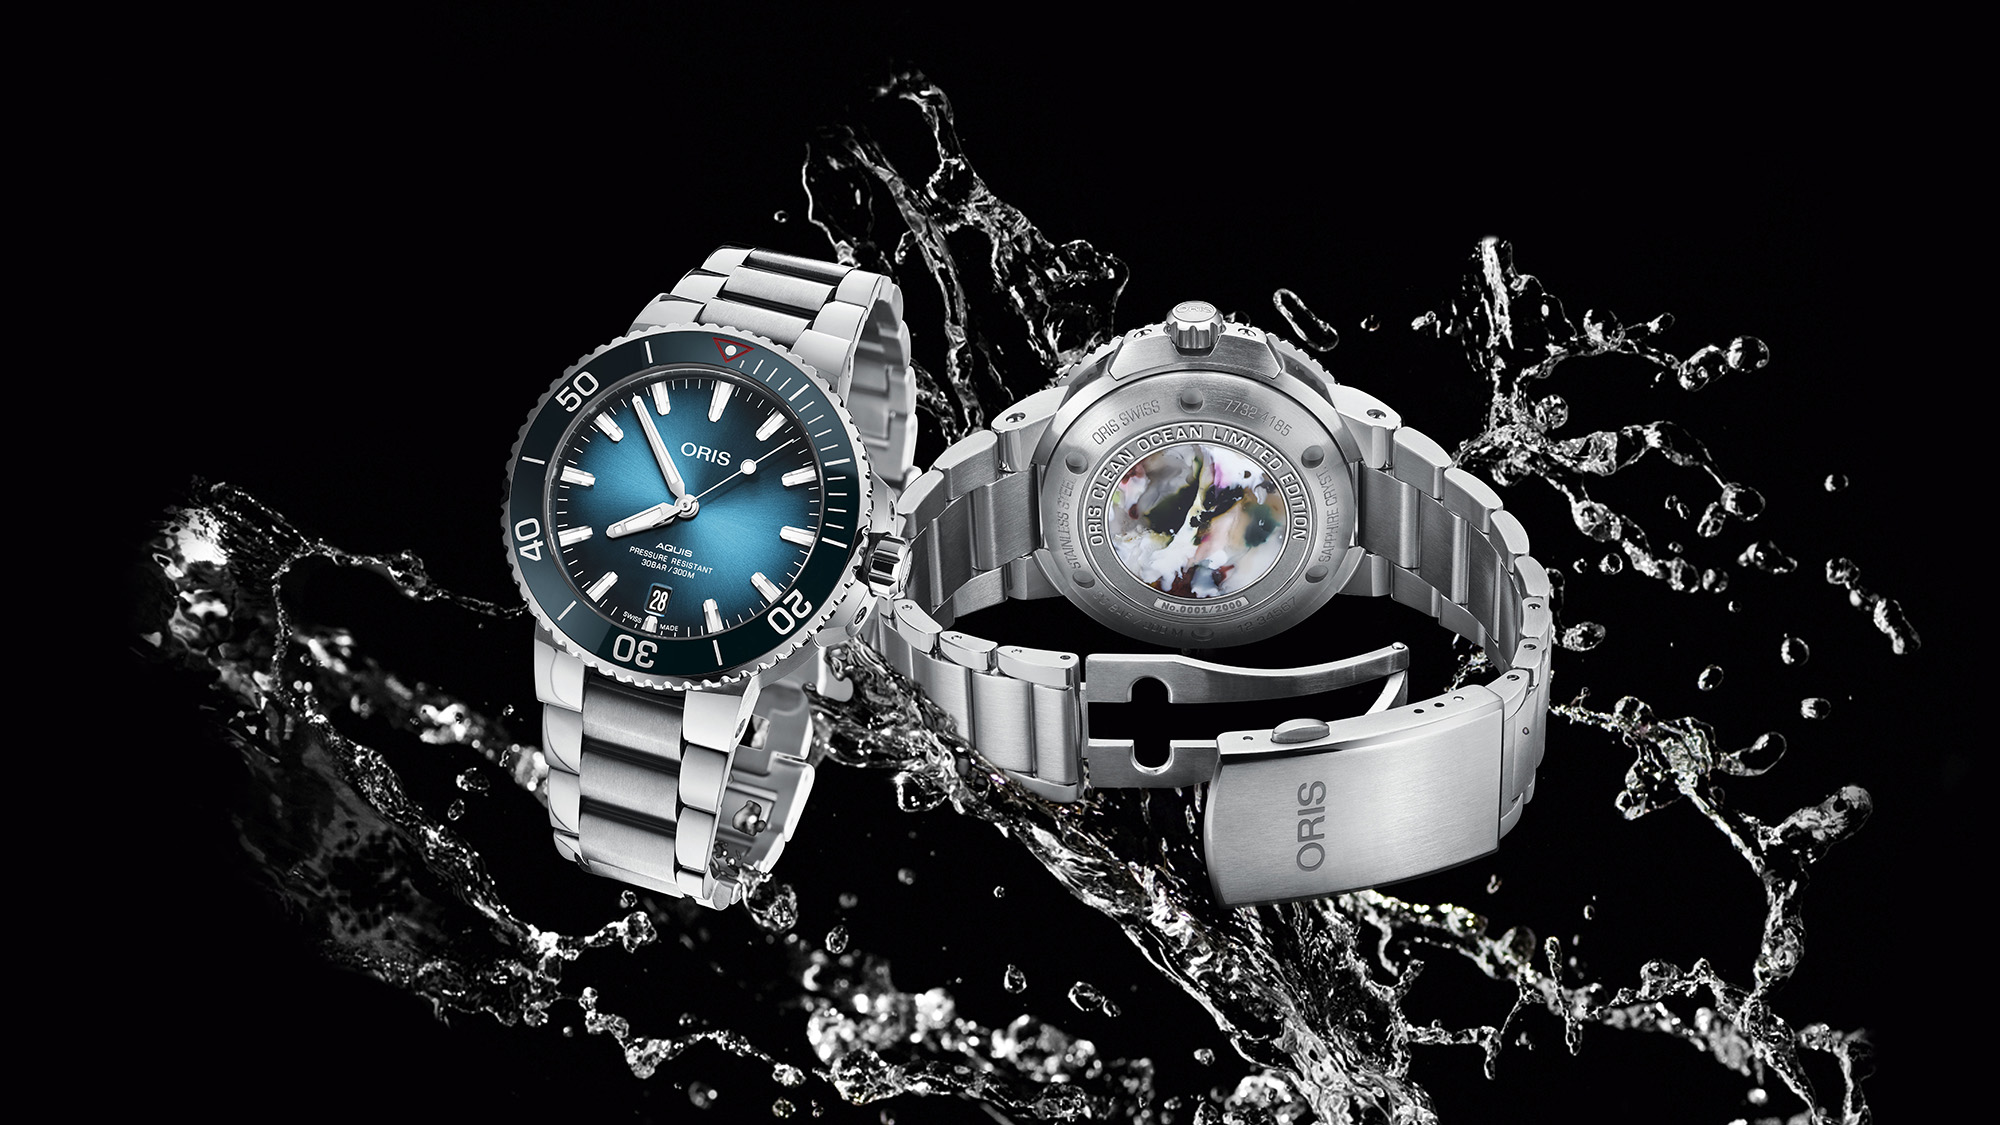 Revolution shines a spotlight on ocean conservation on World Oceans Day with Oris. Shown here is the Oris Clean Ocean limited edition features a medallion made from recycled PET plastic.